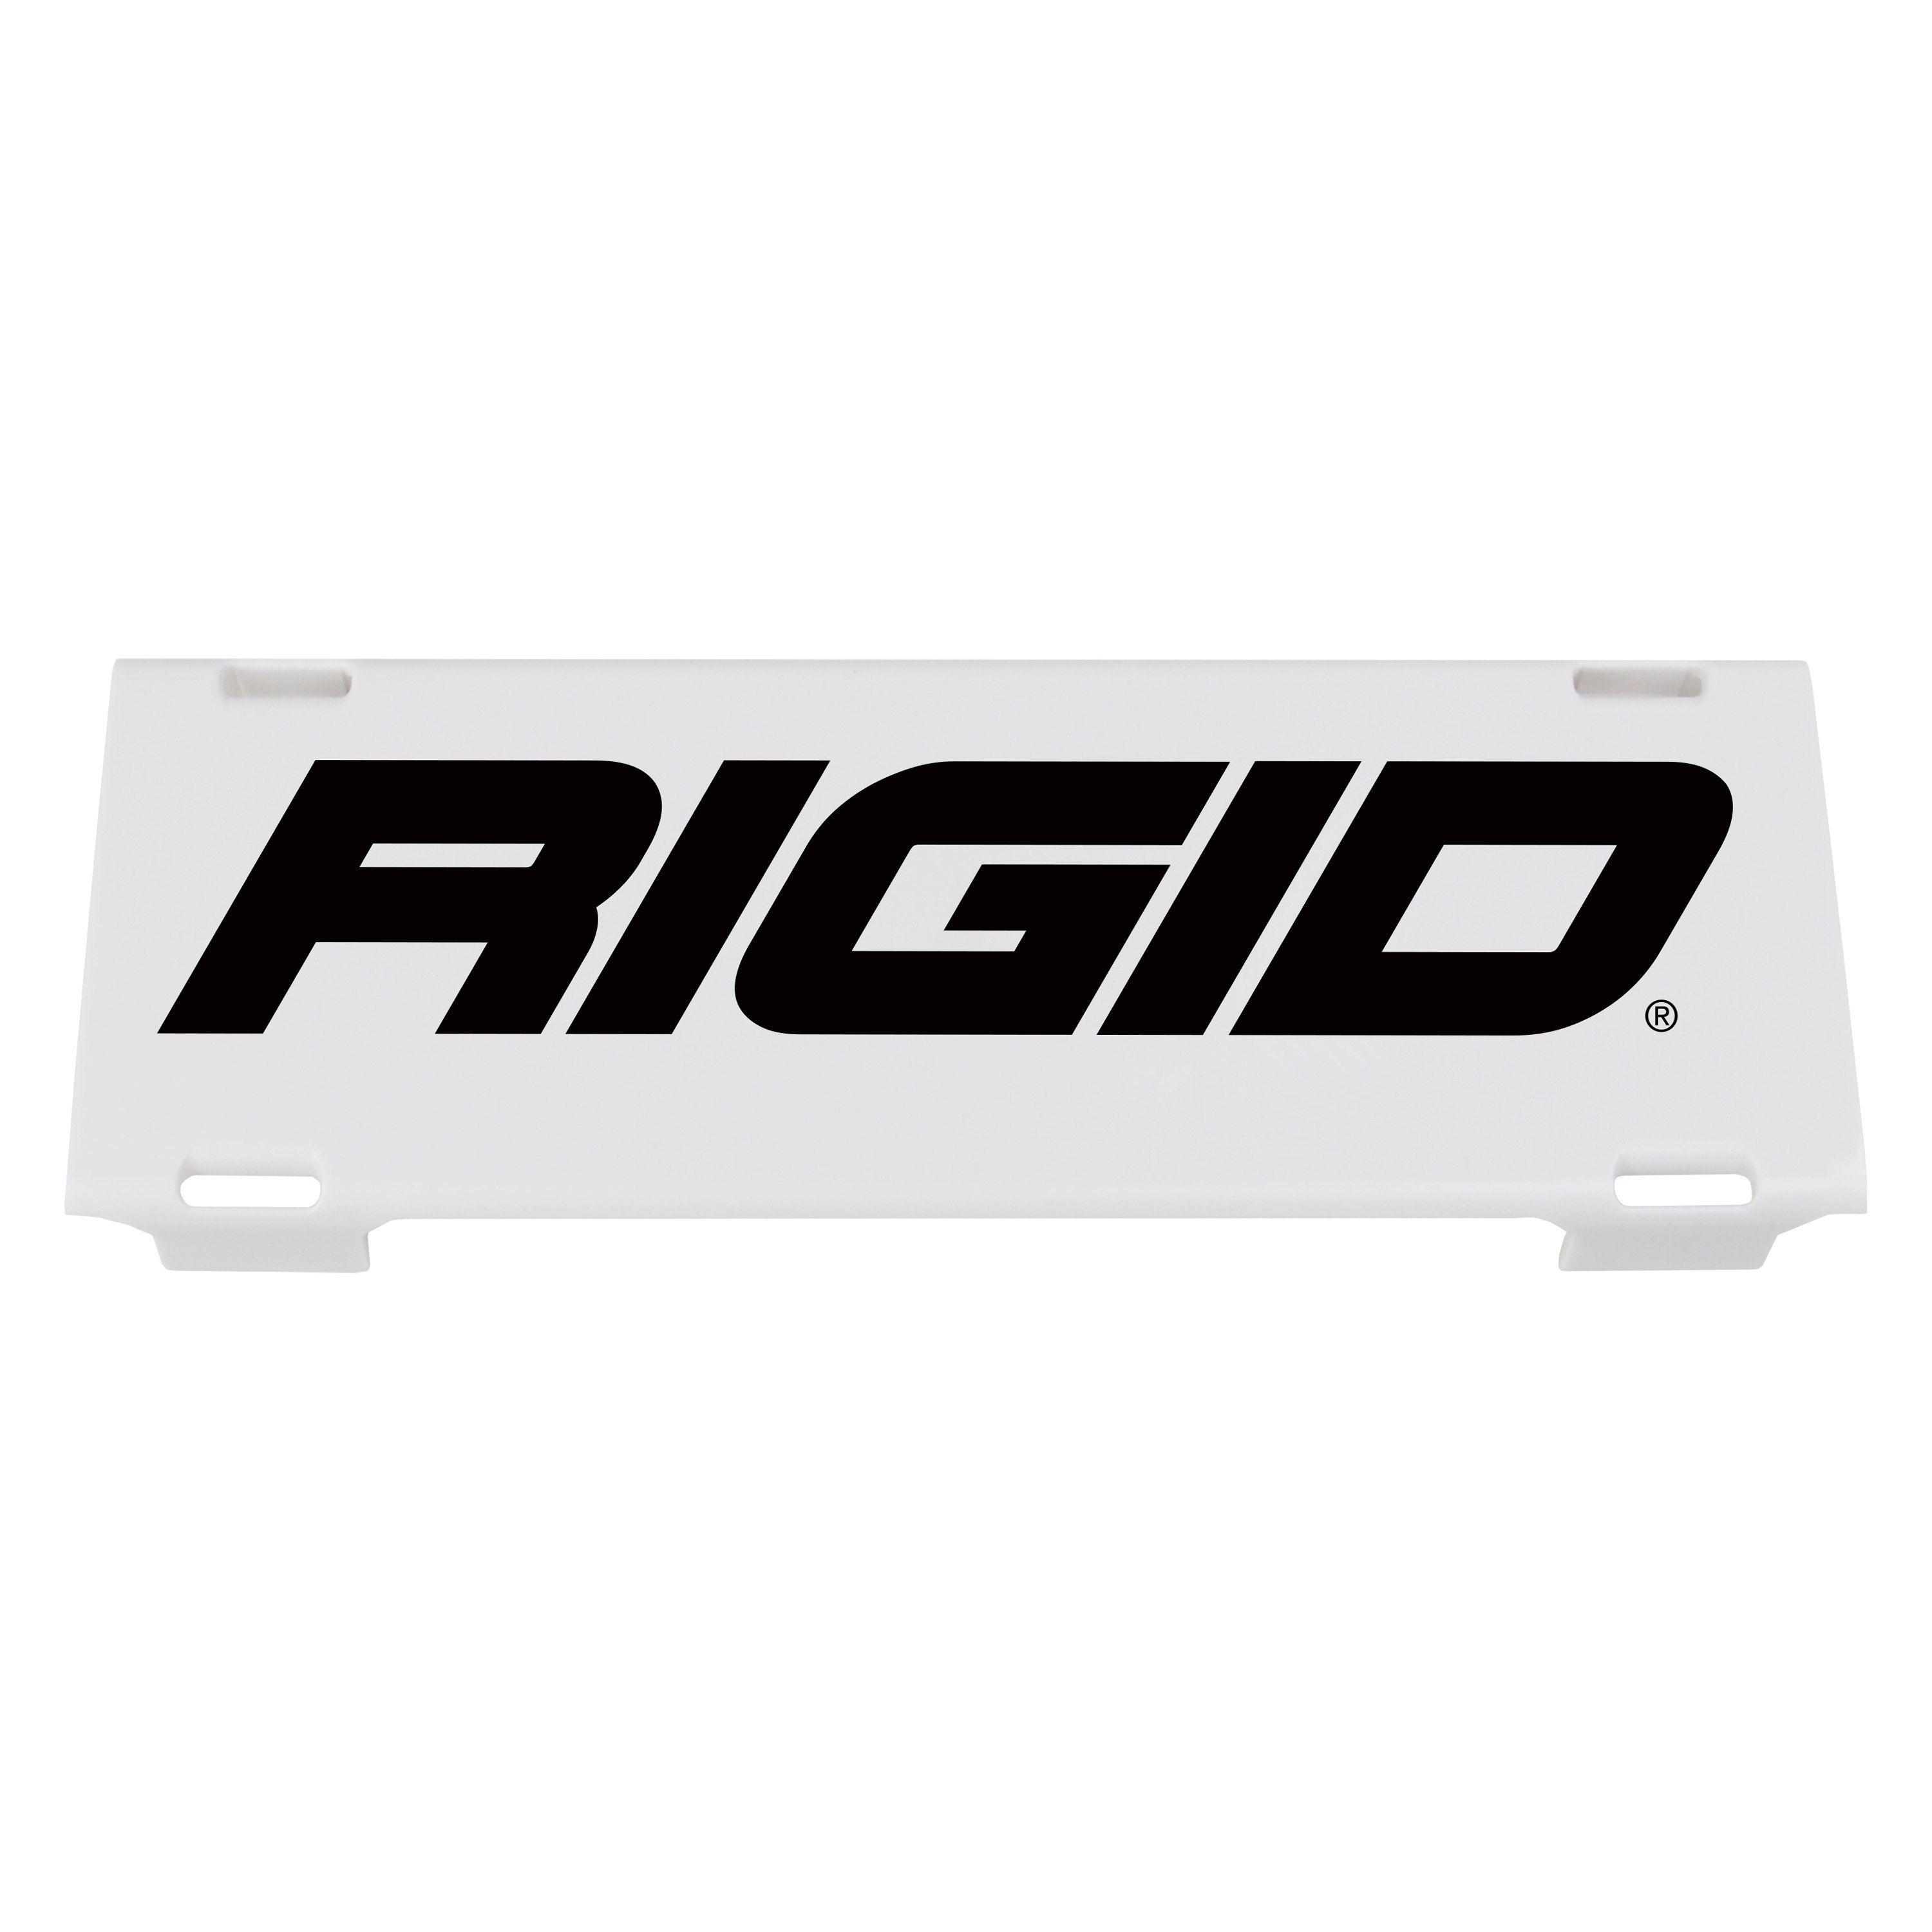 Rectangular Black and White Logo - Rigid Industries® Polycarbonate Light Covers For E Series